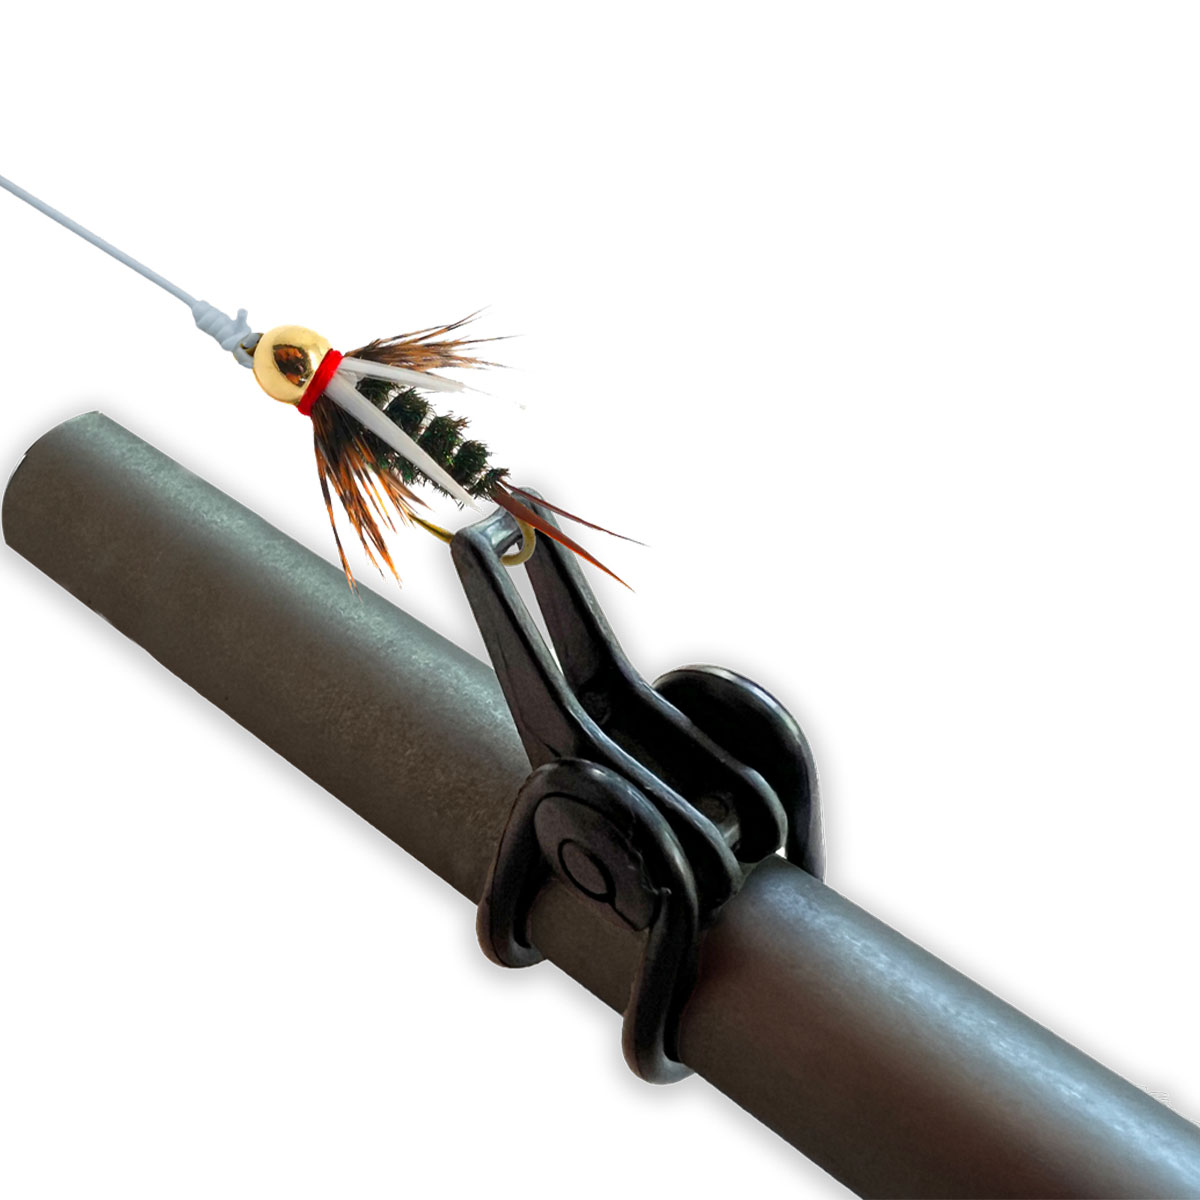 Loon Hook Holder, Fly Rod Accessories, Fly Rods